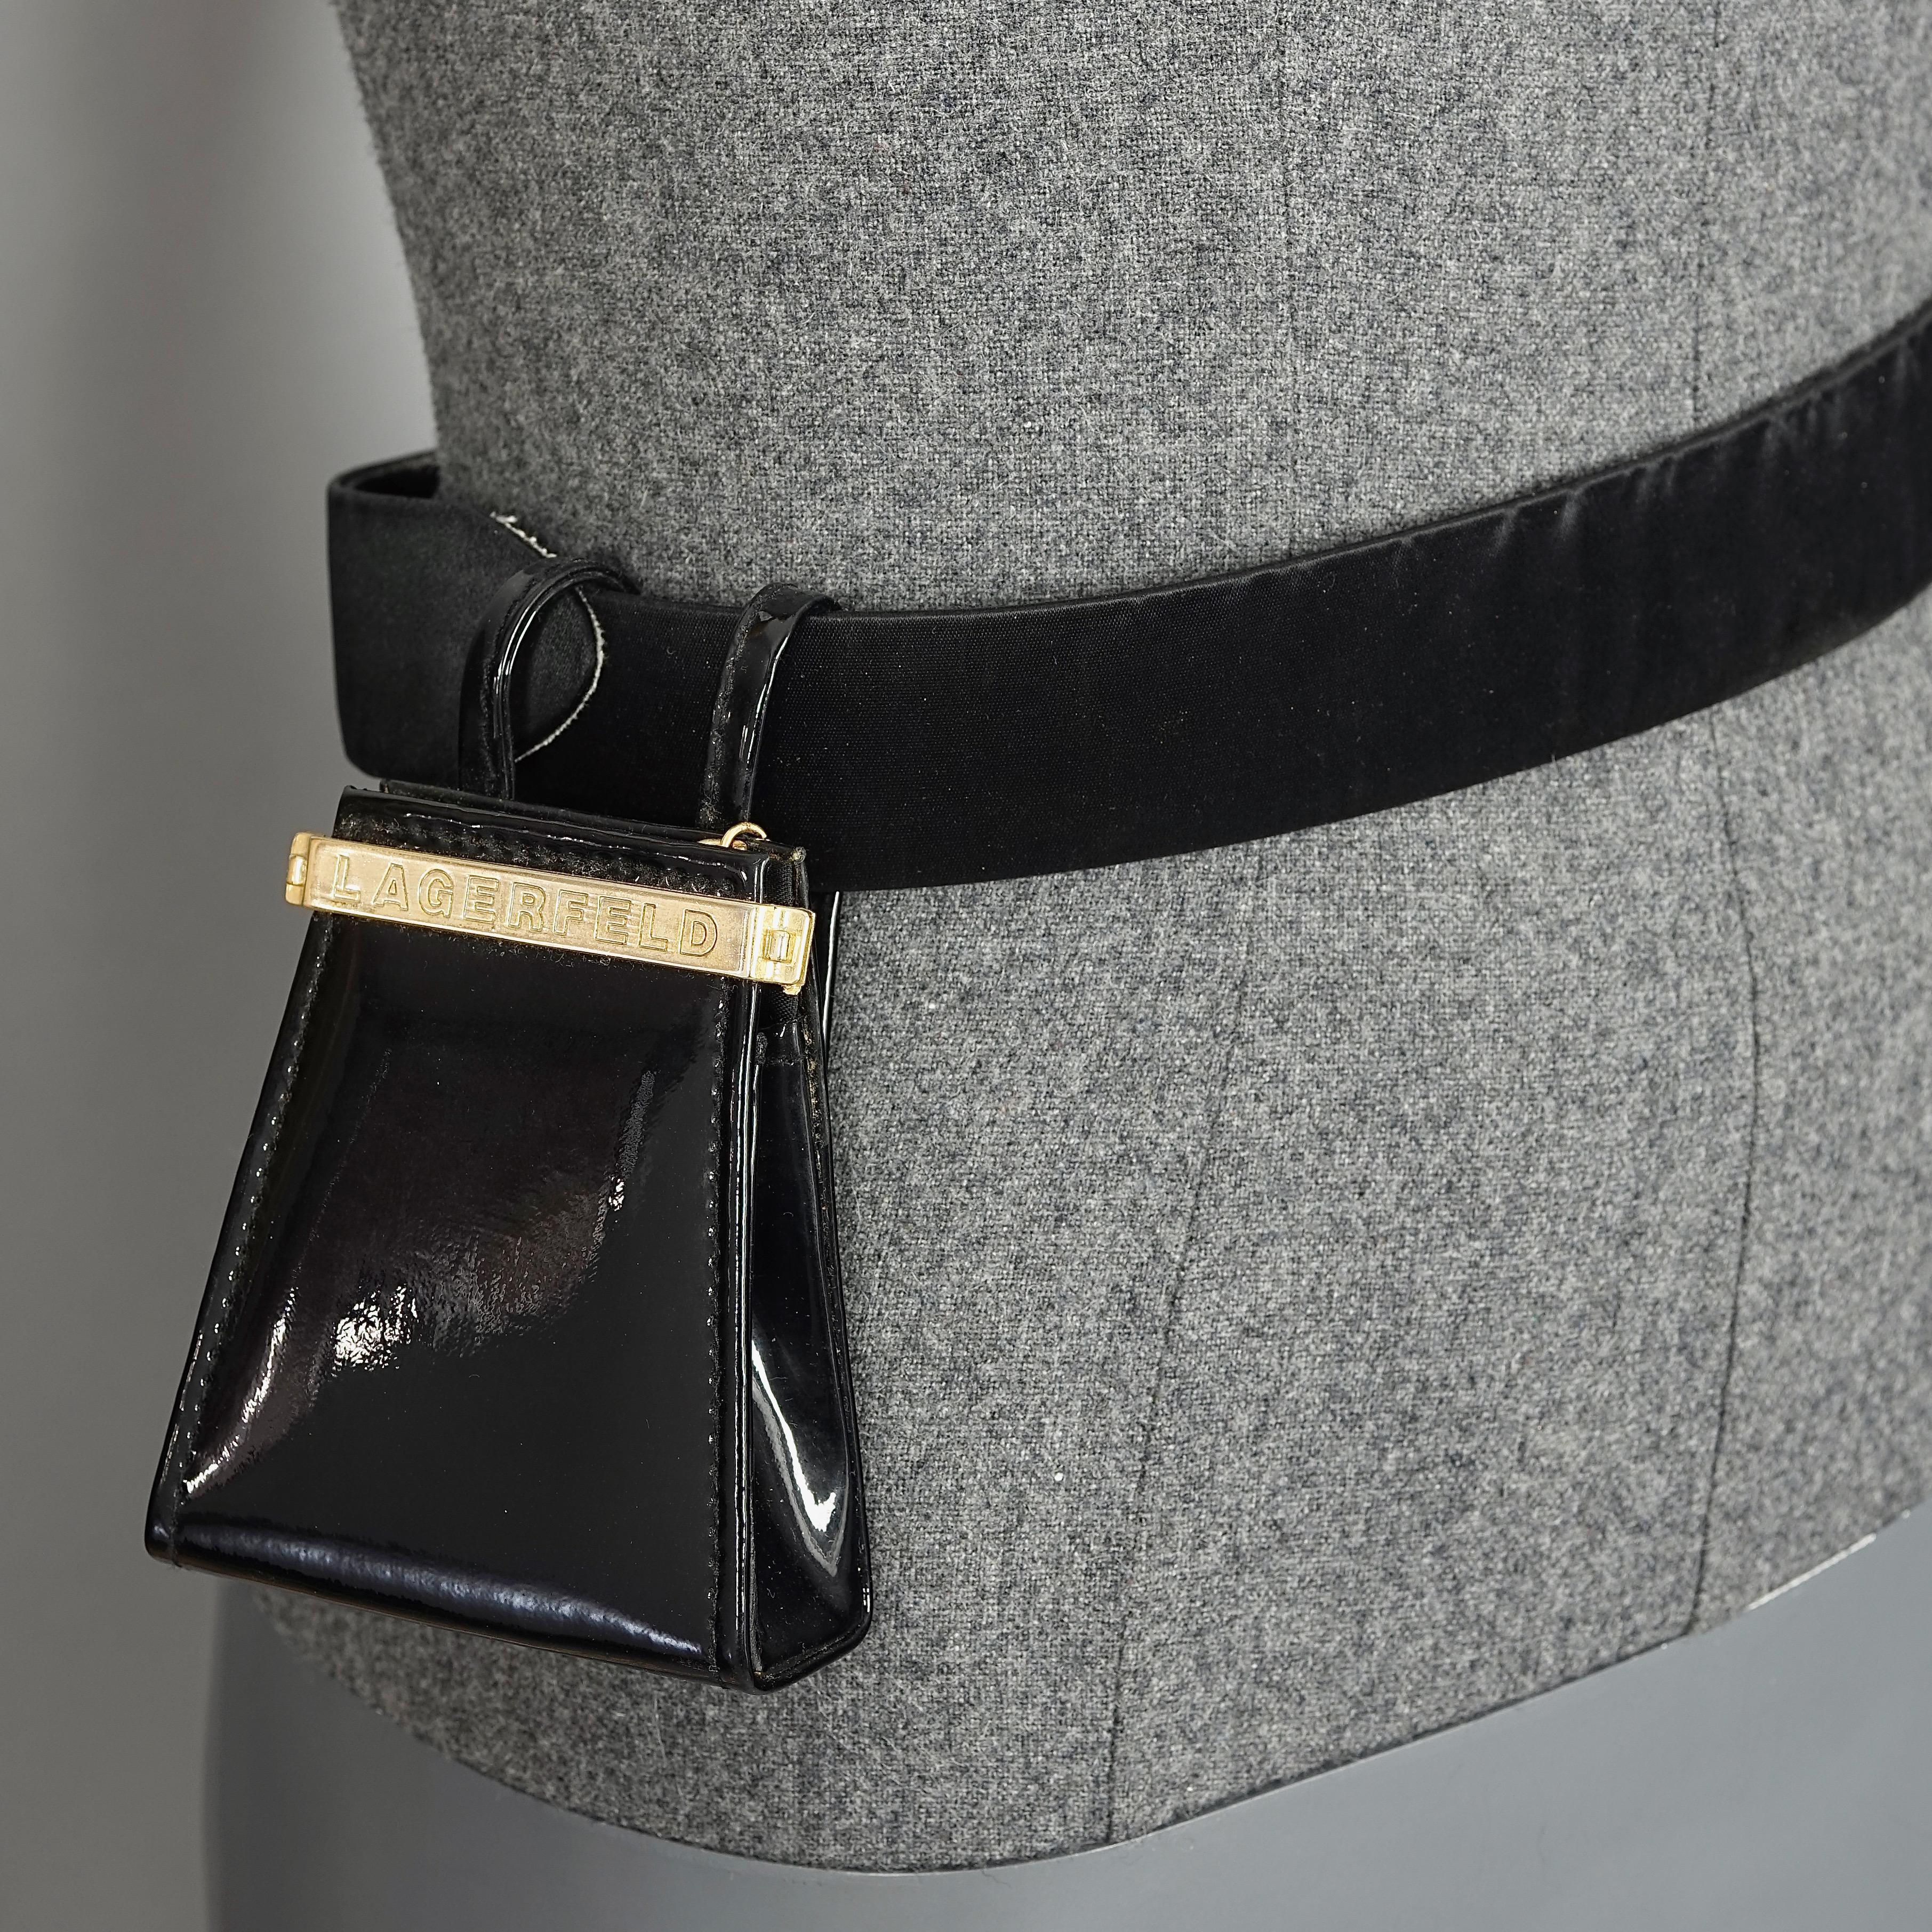 Vintage KARL LAGERFELD Logo Black Patent Coin Purse Mini Belt Bag

Measurements:
Height: 3.74 inches  (9.5 cm) excluding belt hoops
Width: 3.15 inches  (8 cm)
Depth: 1.38 inches  (3.5 cm)

Features: 
- 100% Authentic KARL LAGERFELD.
- Engraved